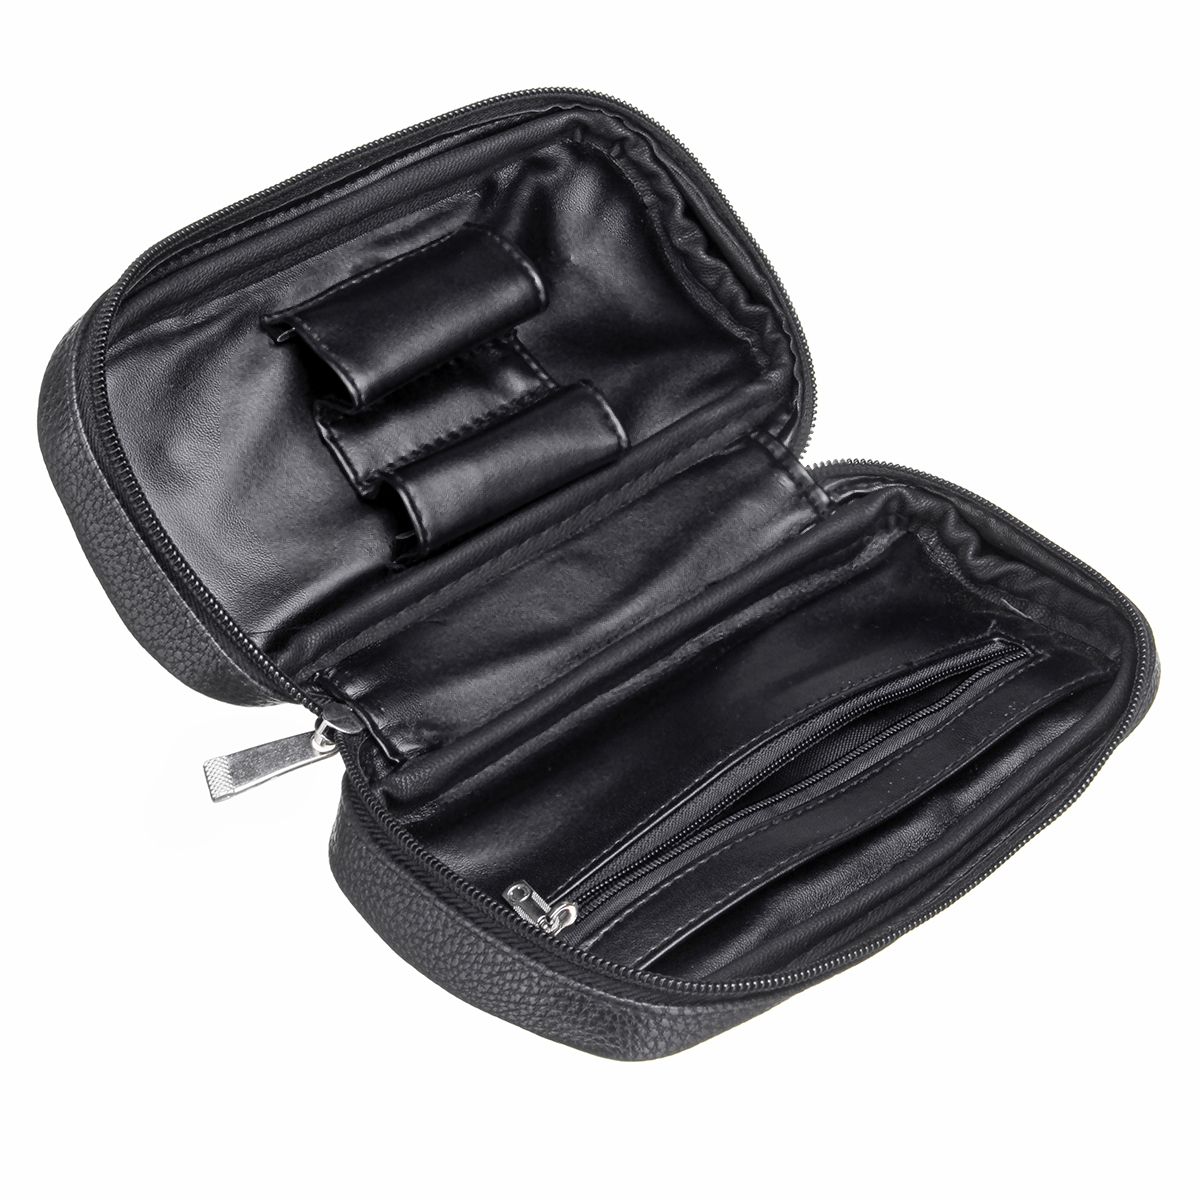 7x37-Inch-Durable-Portable-Leather-2-Pipes-Polyurethane-Storage-Case-Bag-1457256